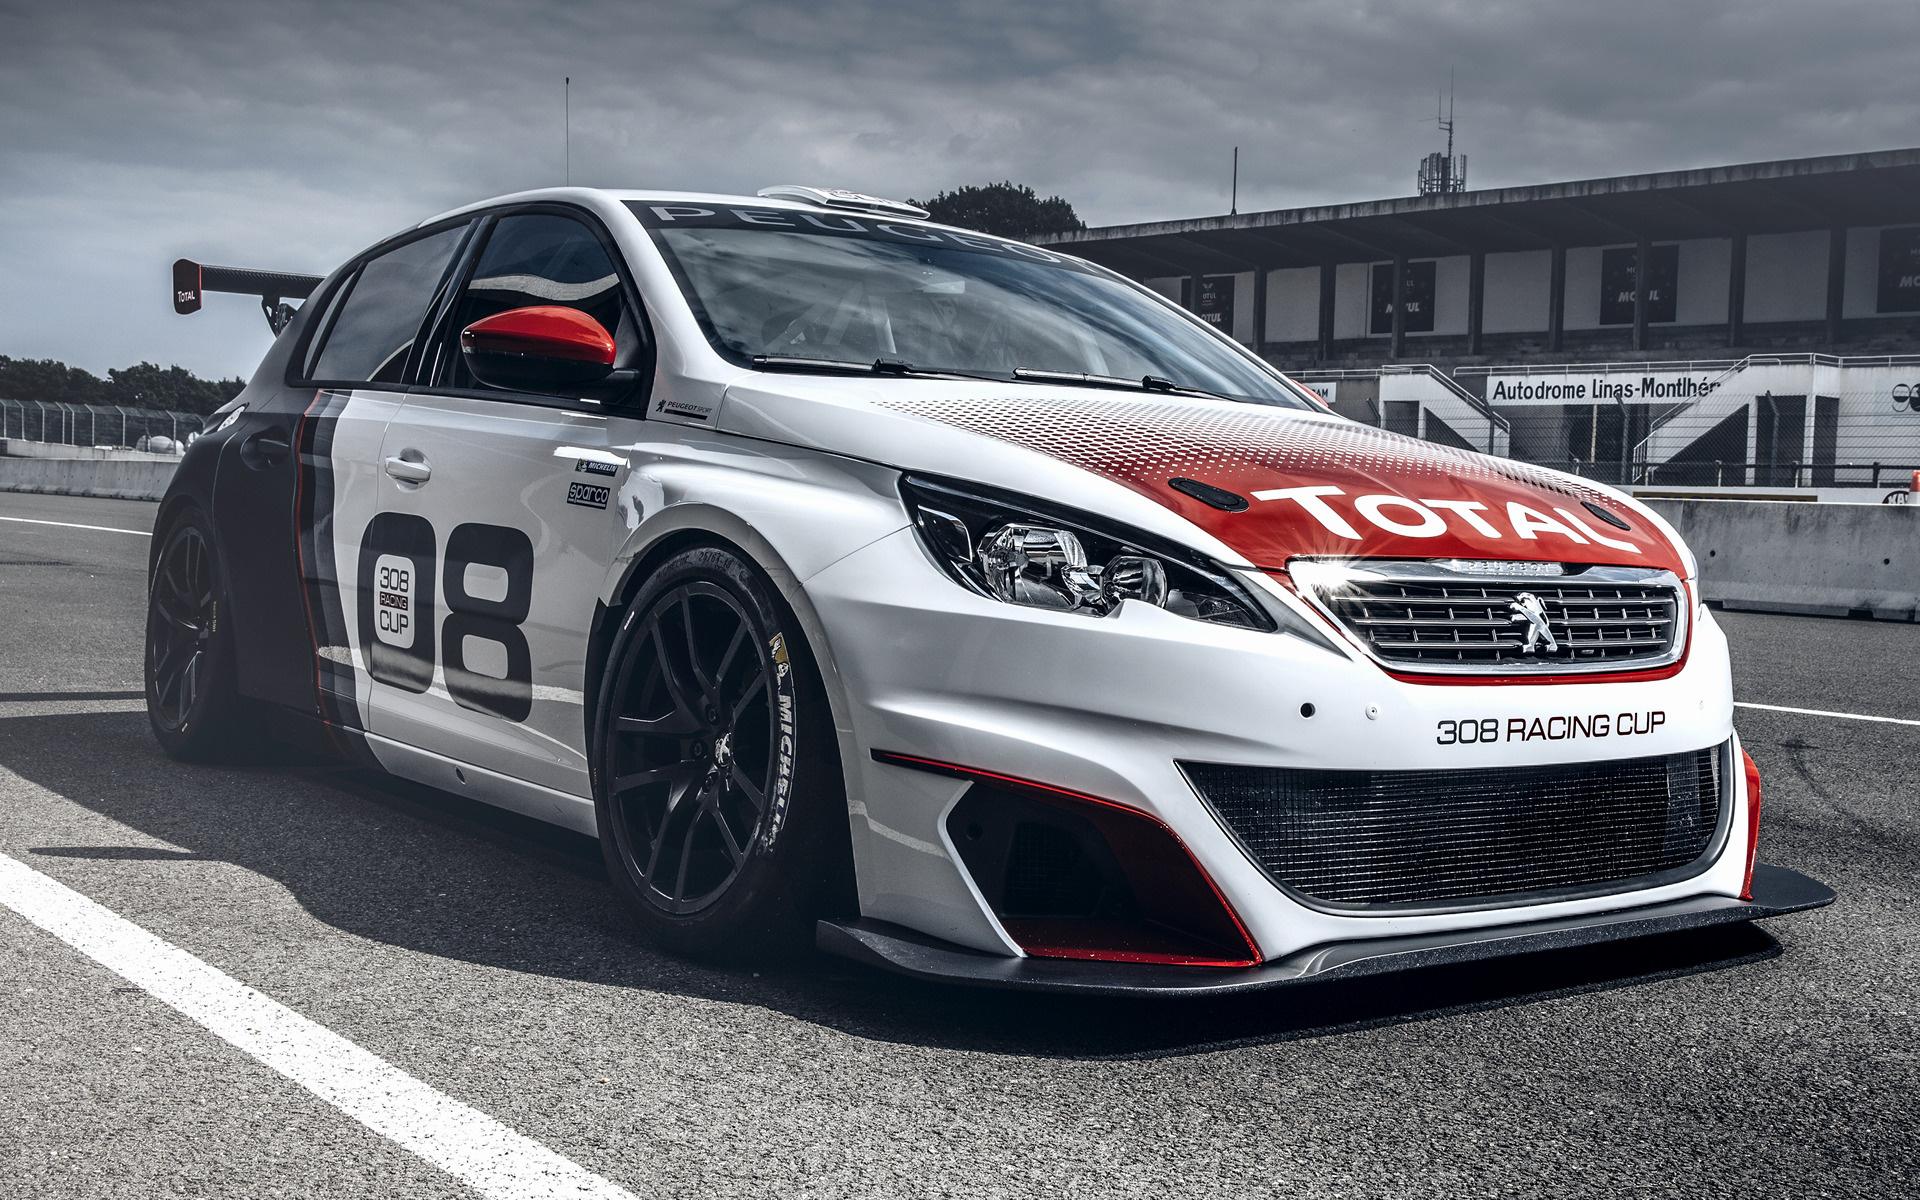 Peugeot 308 Racing Cup and HD Image